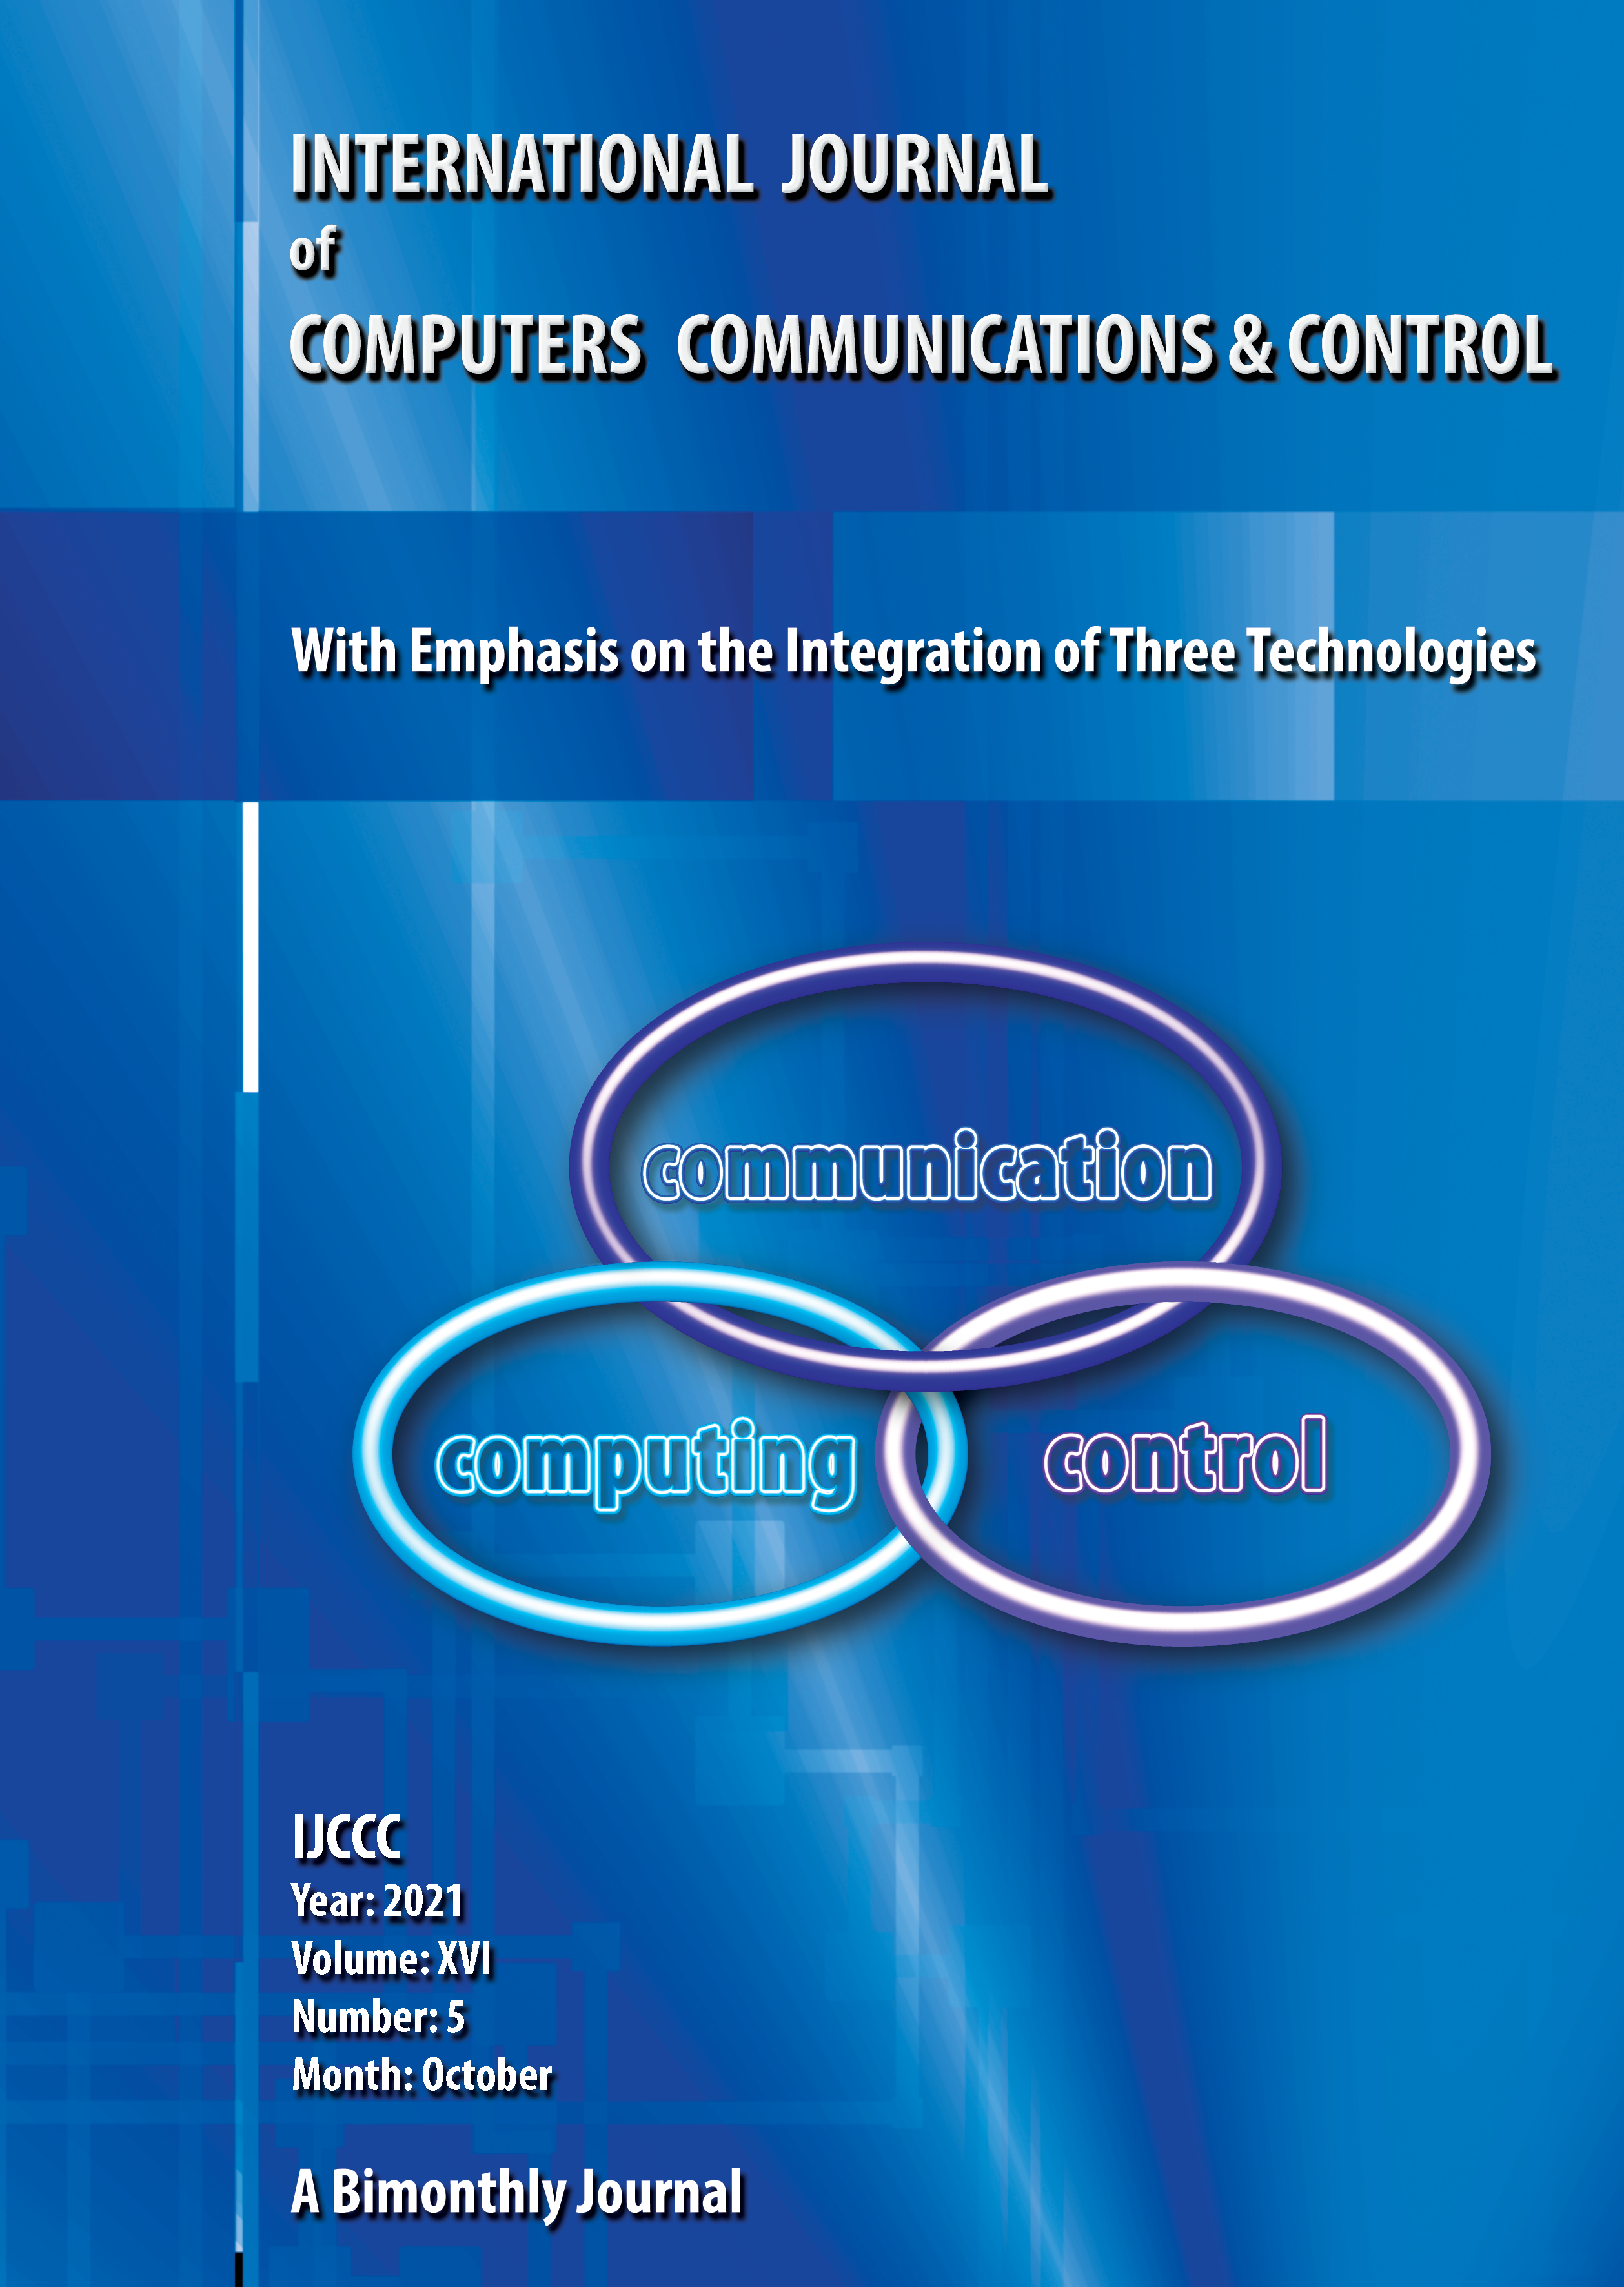 					View Vol. 16 No. 5 (2021): International Journal of Computers Communications & Control (October)
				